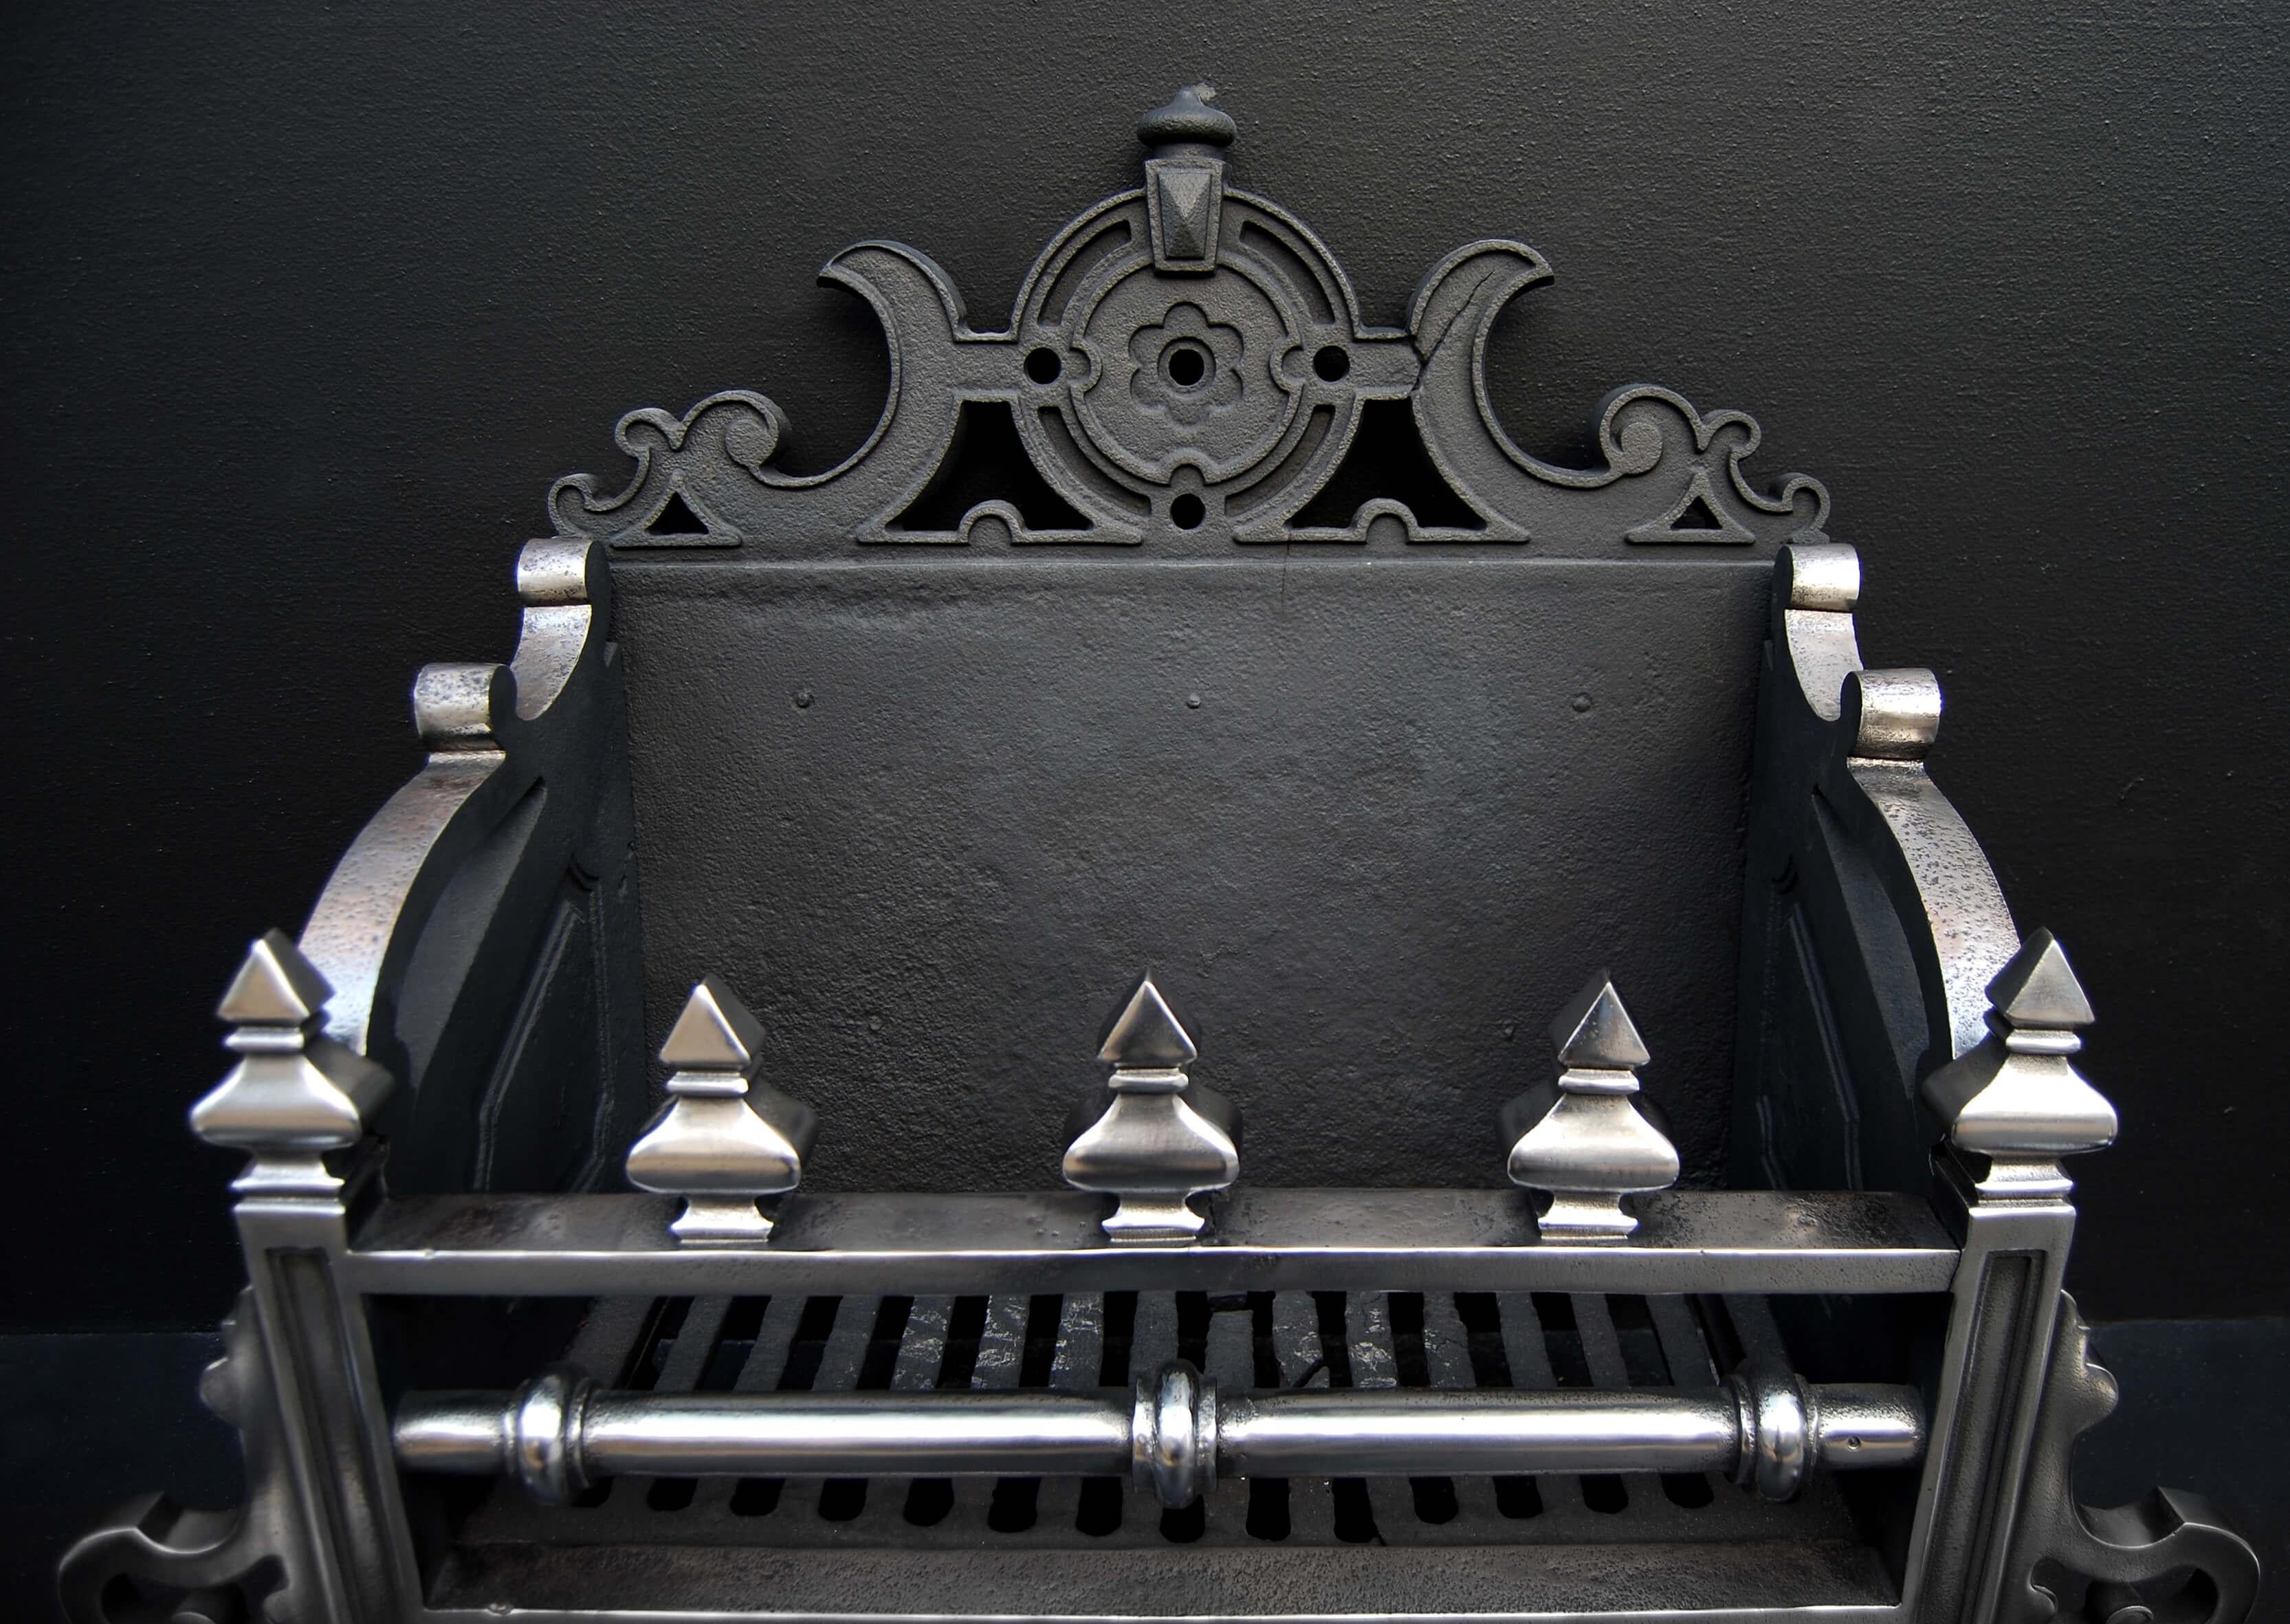 A large and impressive mid 19th century English cast iron firegrate. The polished steel dogs with scrolled feet and bulbous decorative finial. The basket front bars with finials above and below. Decorative shaped and pierced back.

Measures: Width